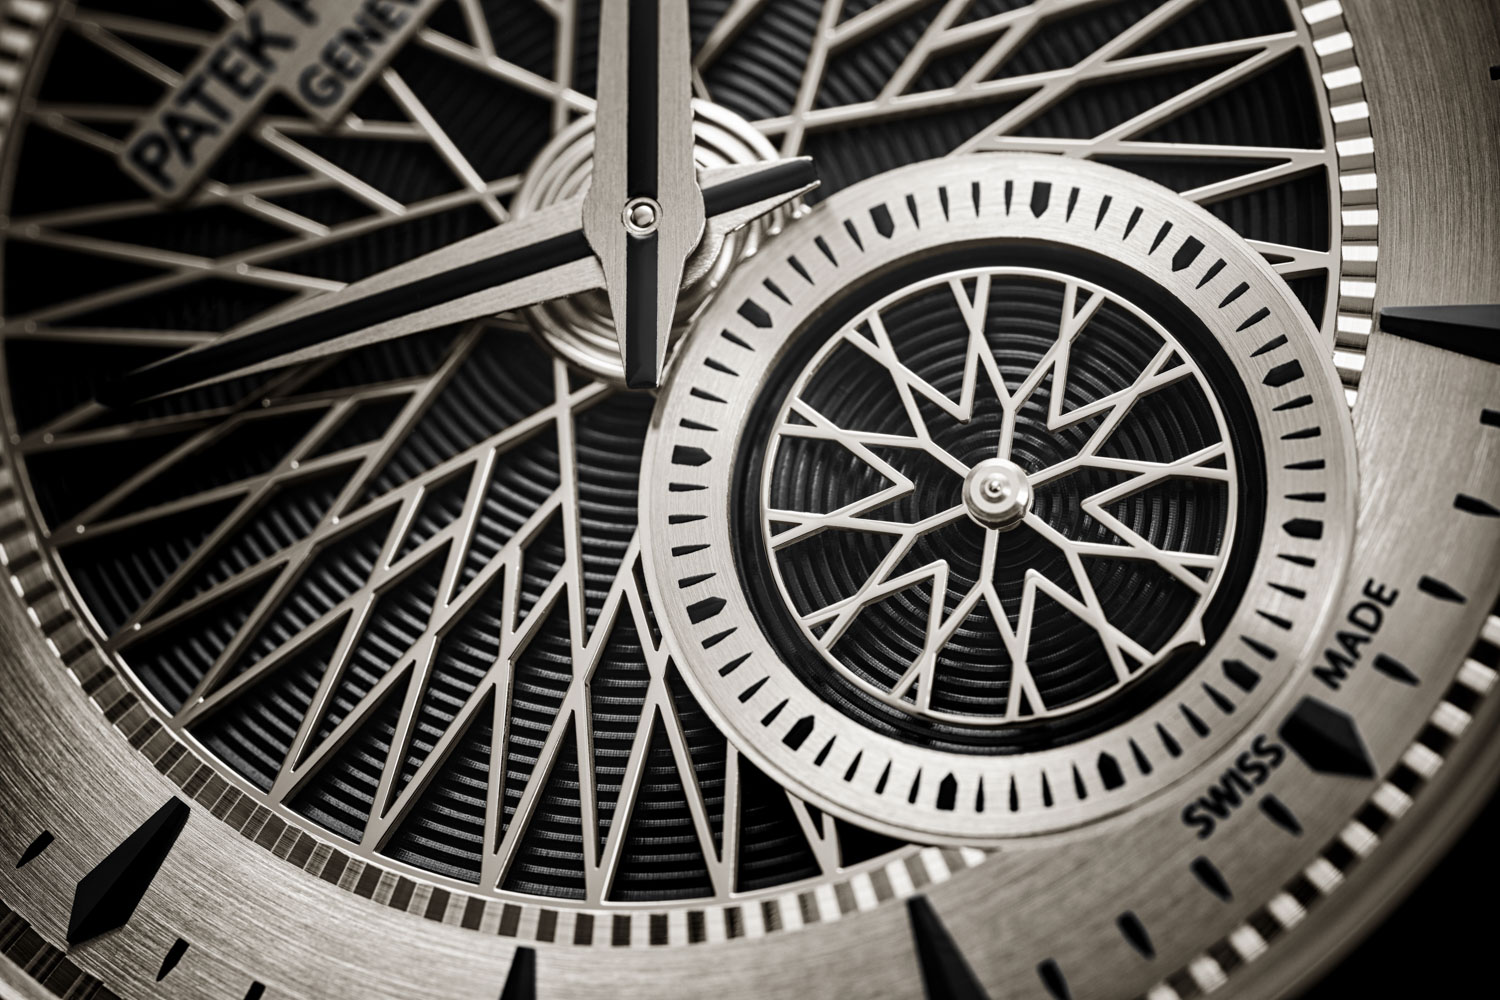 The 5750's dial consists of a five-part construction that starts with white gold, black nickel-plated snailed base with spiraling lines; on top of this is an openworked motif inspired by the spoked wheels of vintage automobiles; a similar rotating disc is used for the small seconds counter, which has a point on its outer edge serving as the seconds hand